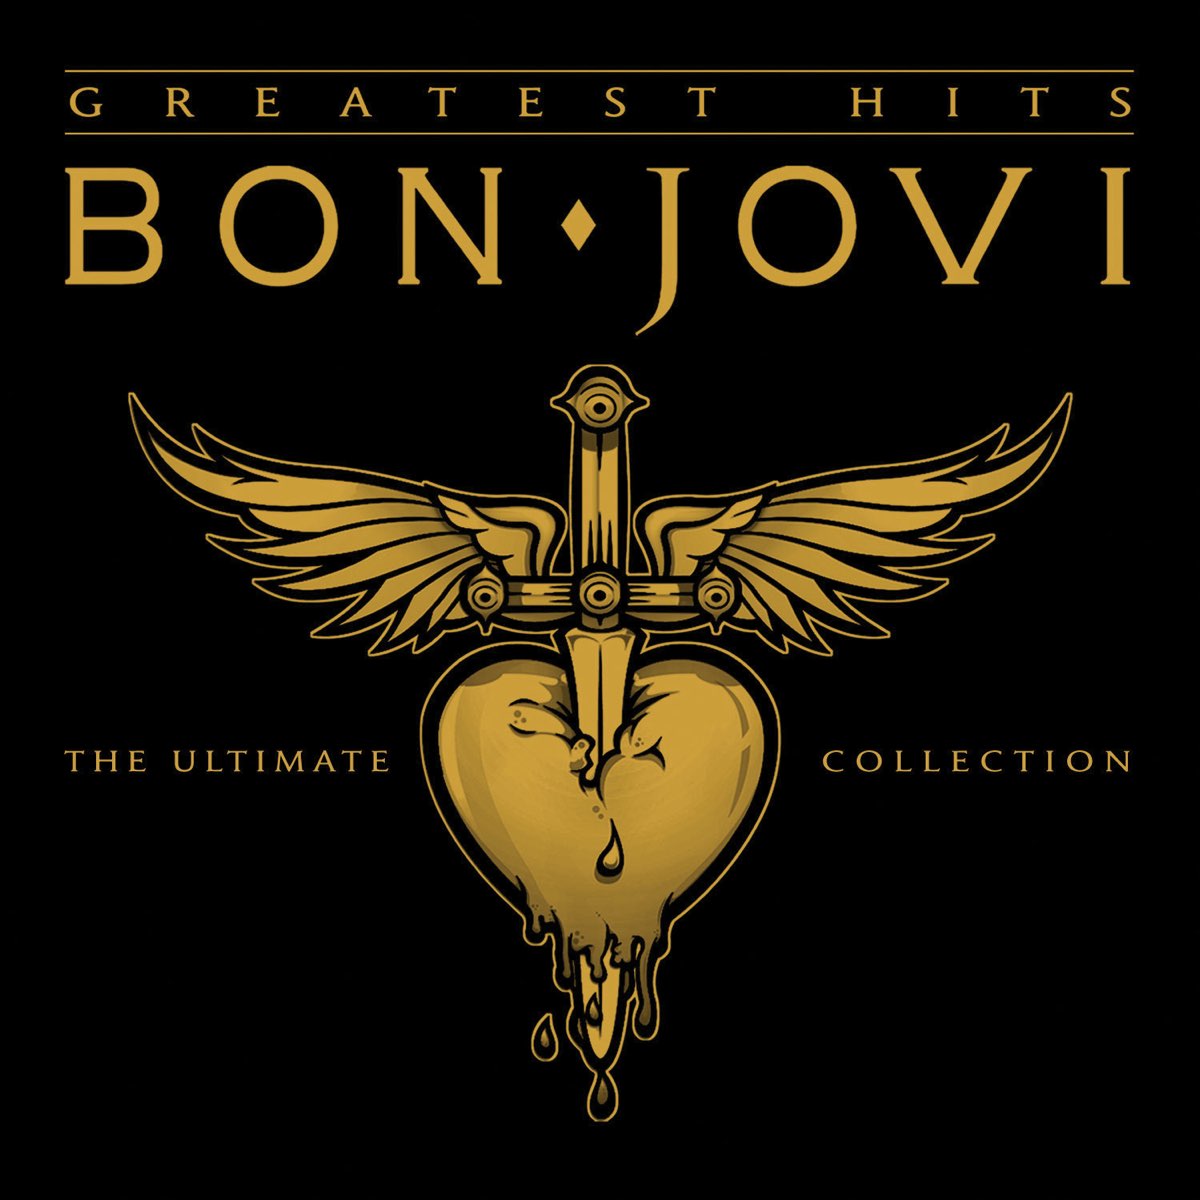 ‎Greatest Hits The Ultimate Collection (Deluxe Edition) by Bon Jovi on